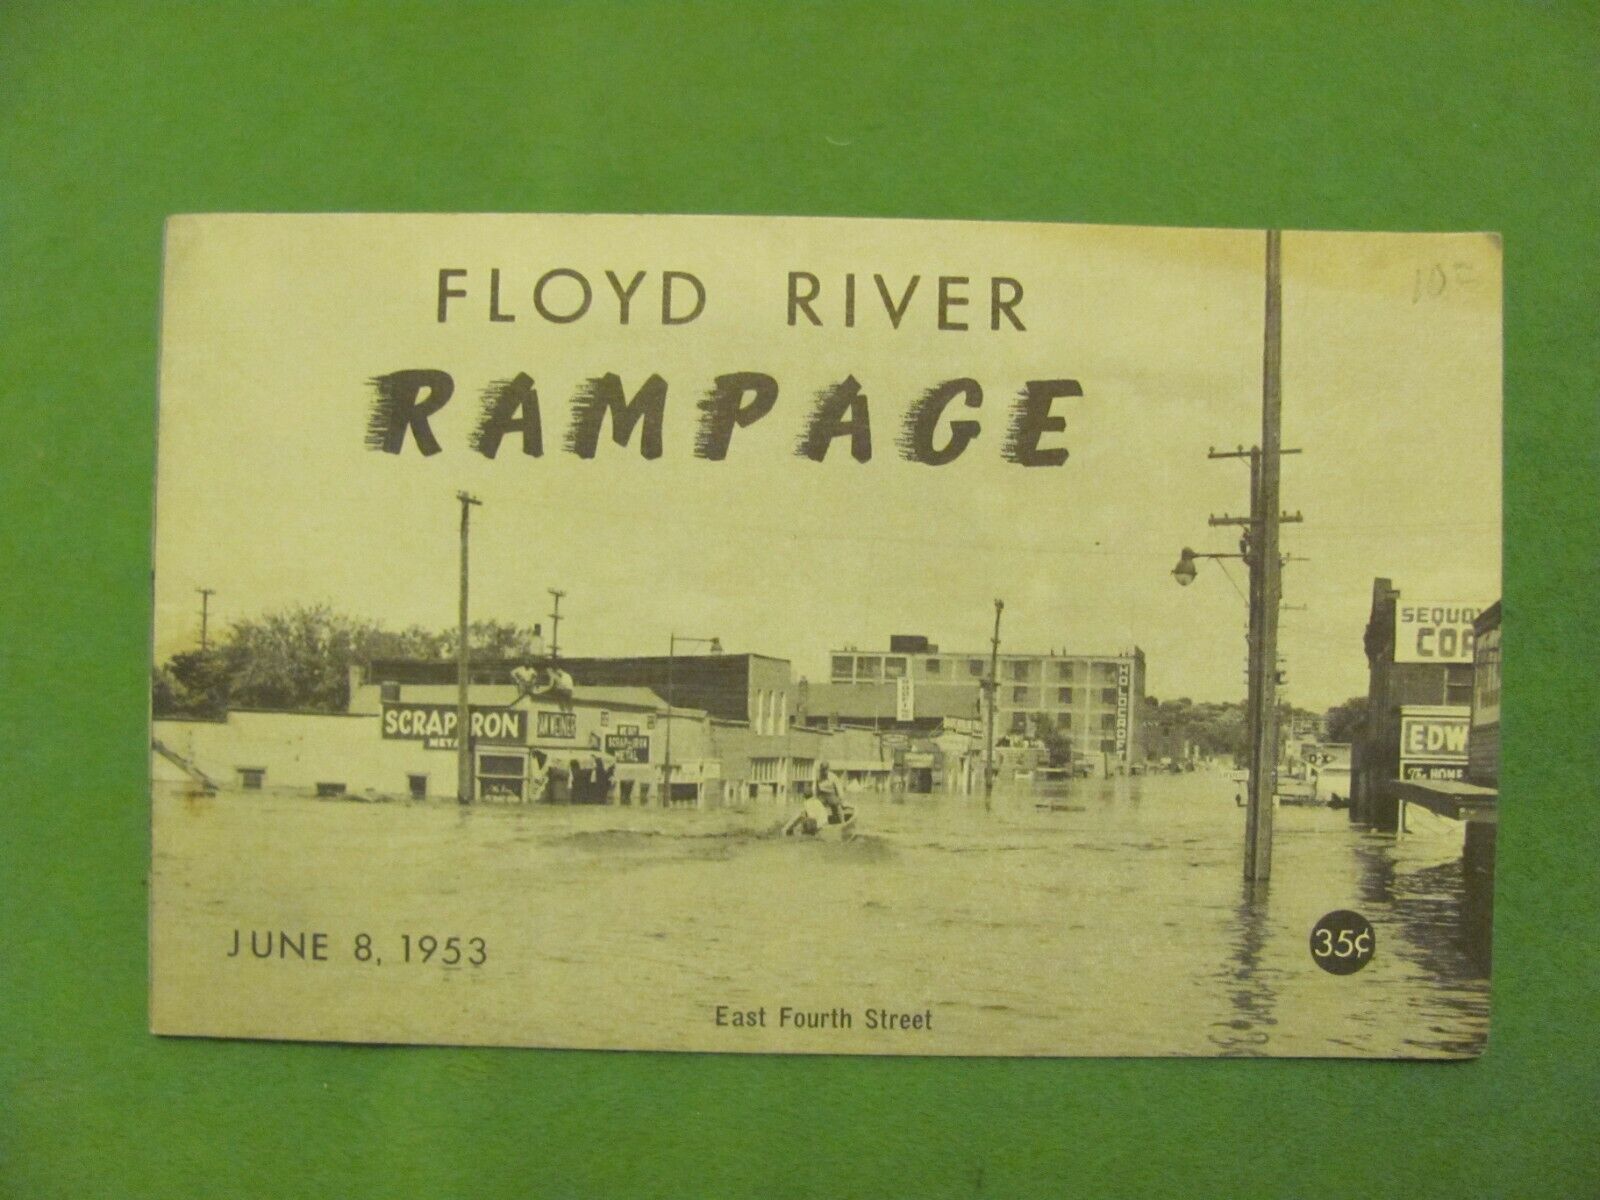 Floyd River Rampage June 8, 1953, Photo View Vintage Booklet Sioux City IA.